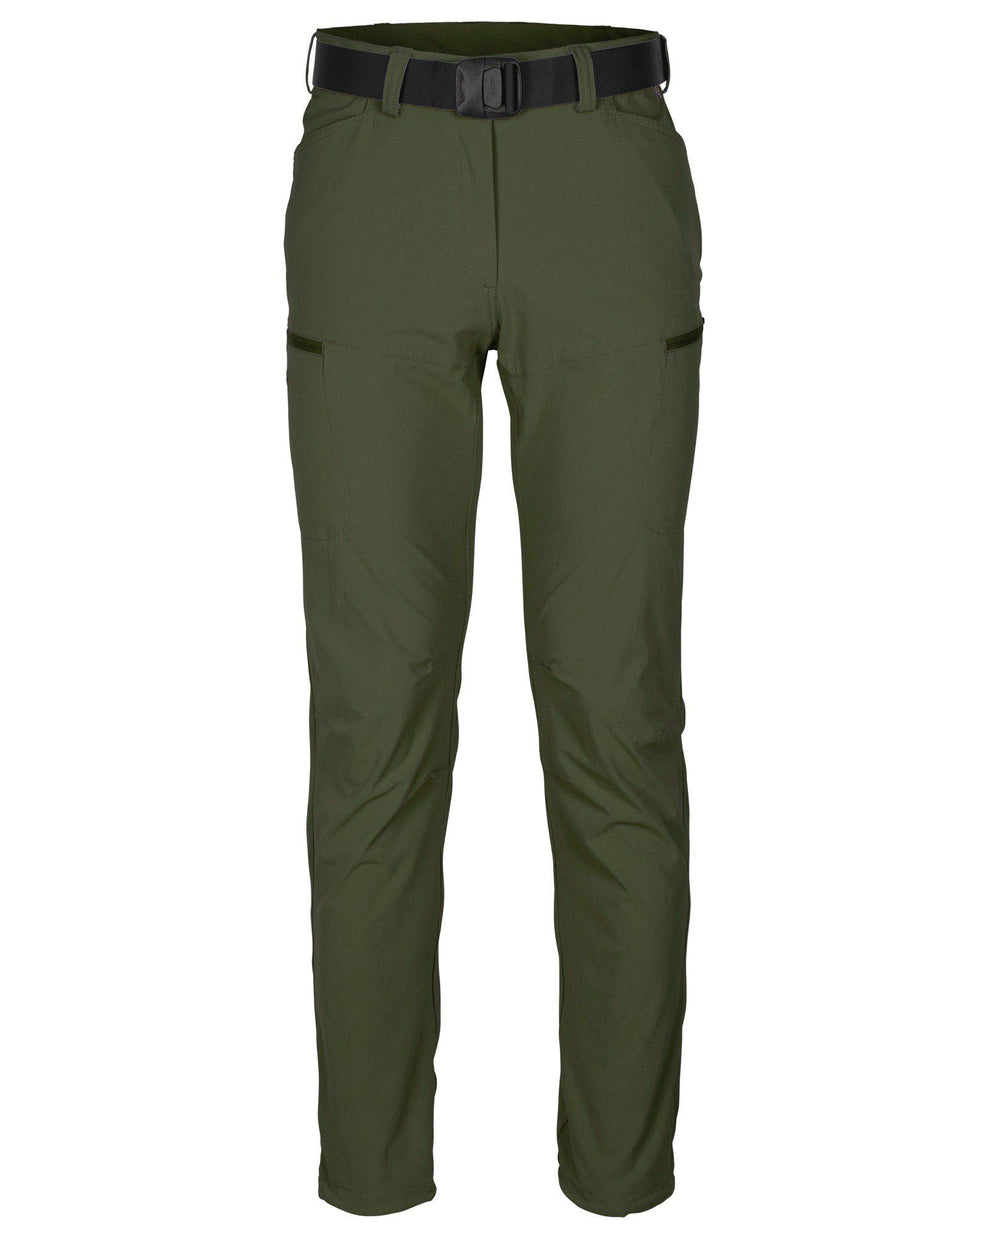 3147-135-01_Pinewood-InsectSafe-Hiking-Trousers-Womens_MossGreen